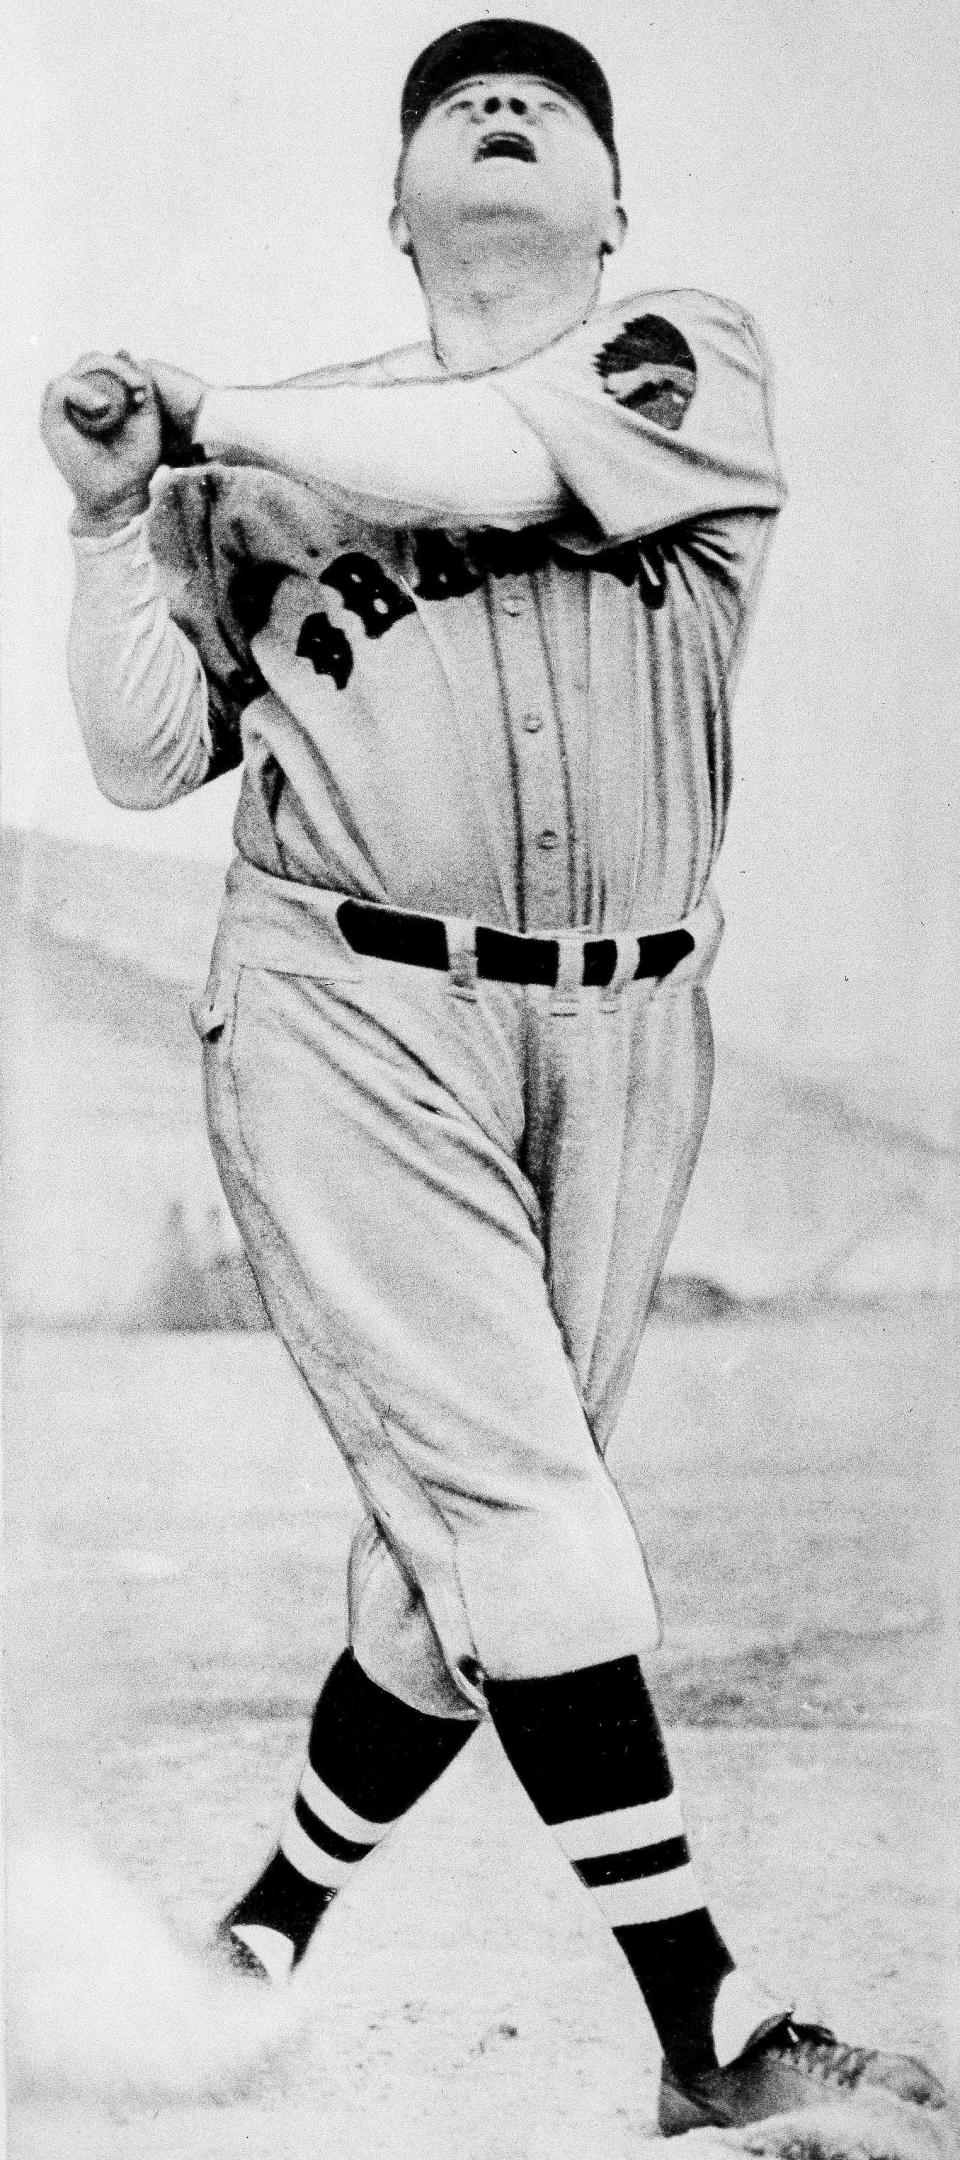 George Herman "Babe" Ruth in 1935 with the Boston Braves.